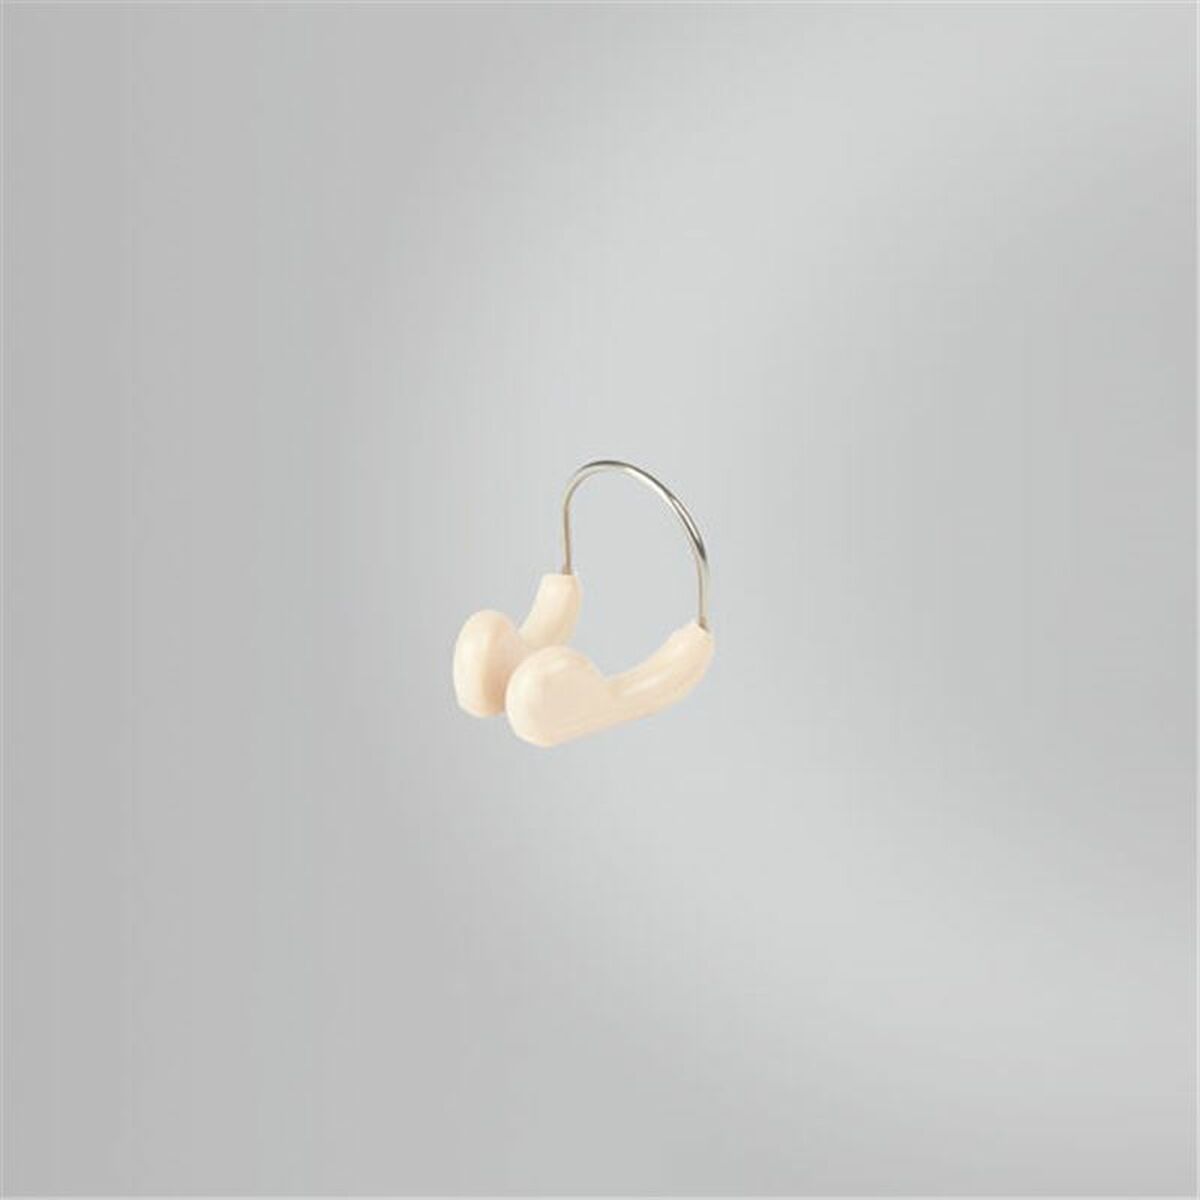 Nose Clip for Swimming Speedo Competition Noseclip Beige